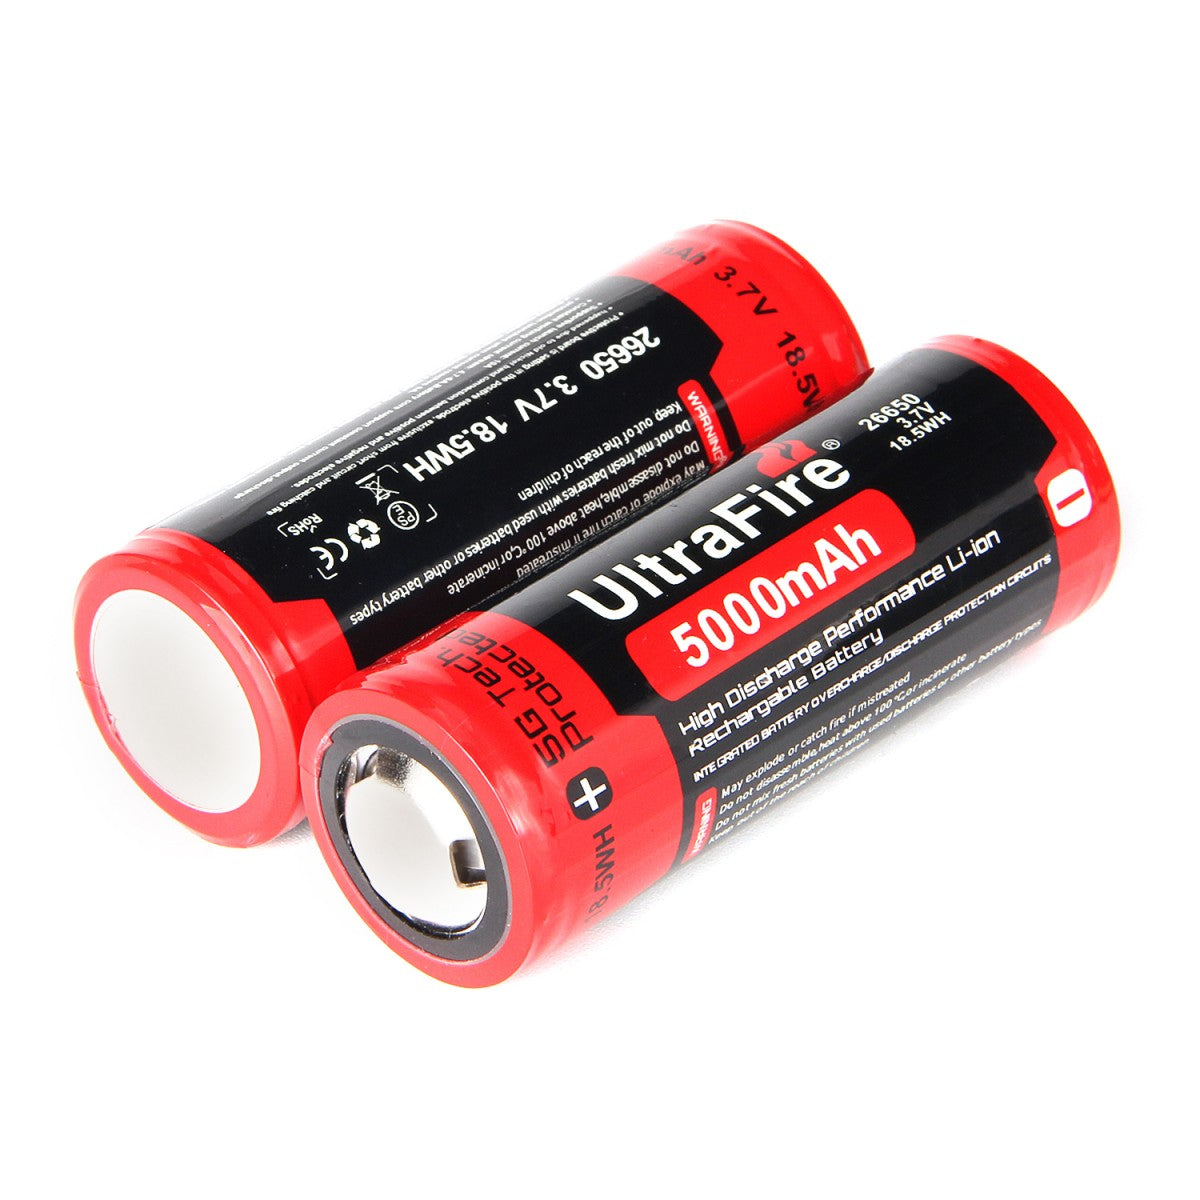 UltraFire 5000mAh 3.7V 26650 Rechargeable BRC Lithium Battery with Protection Board (2PCS)